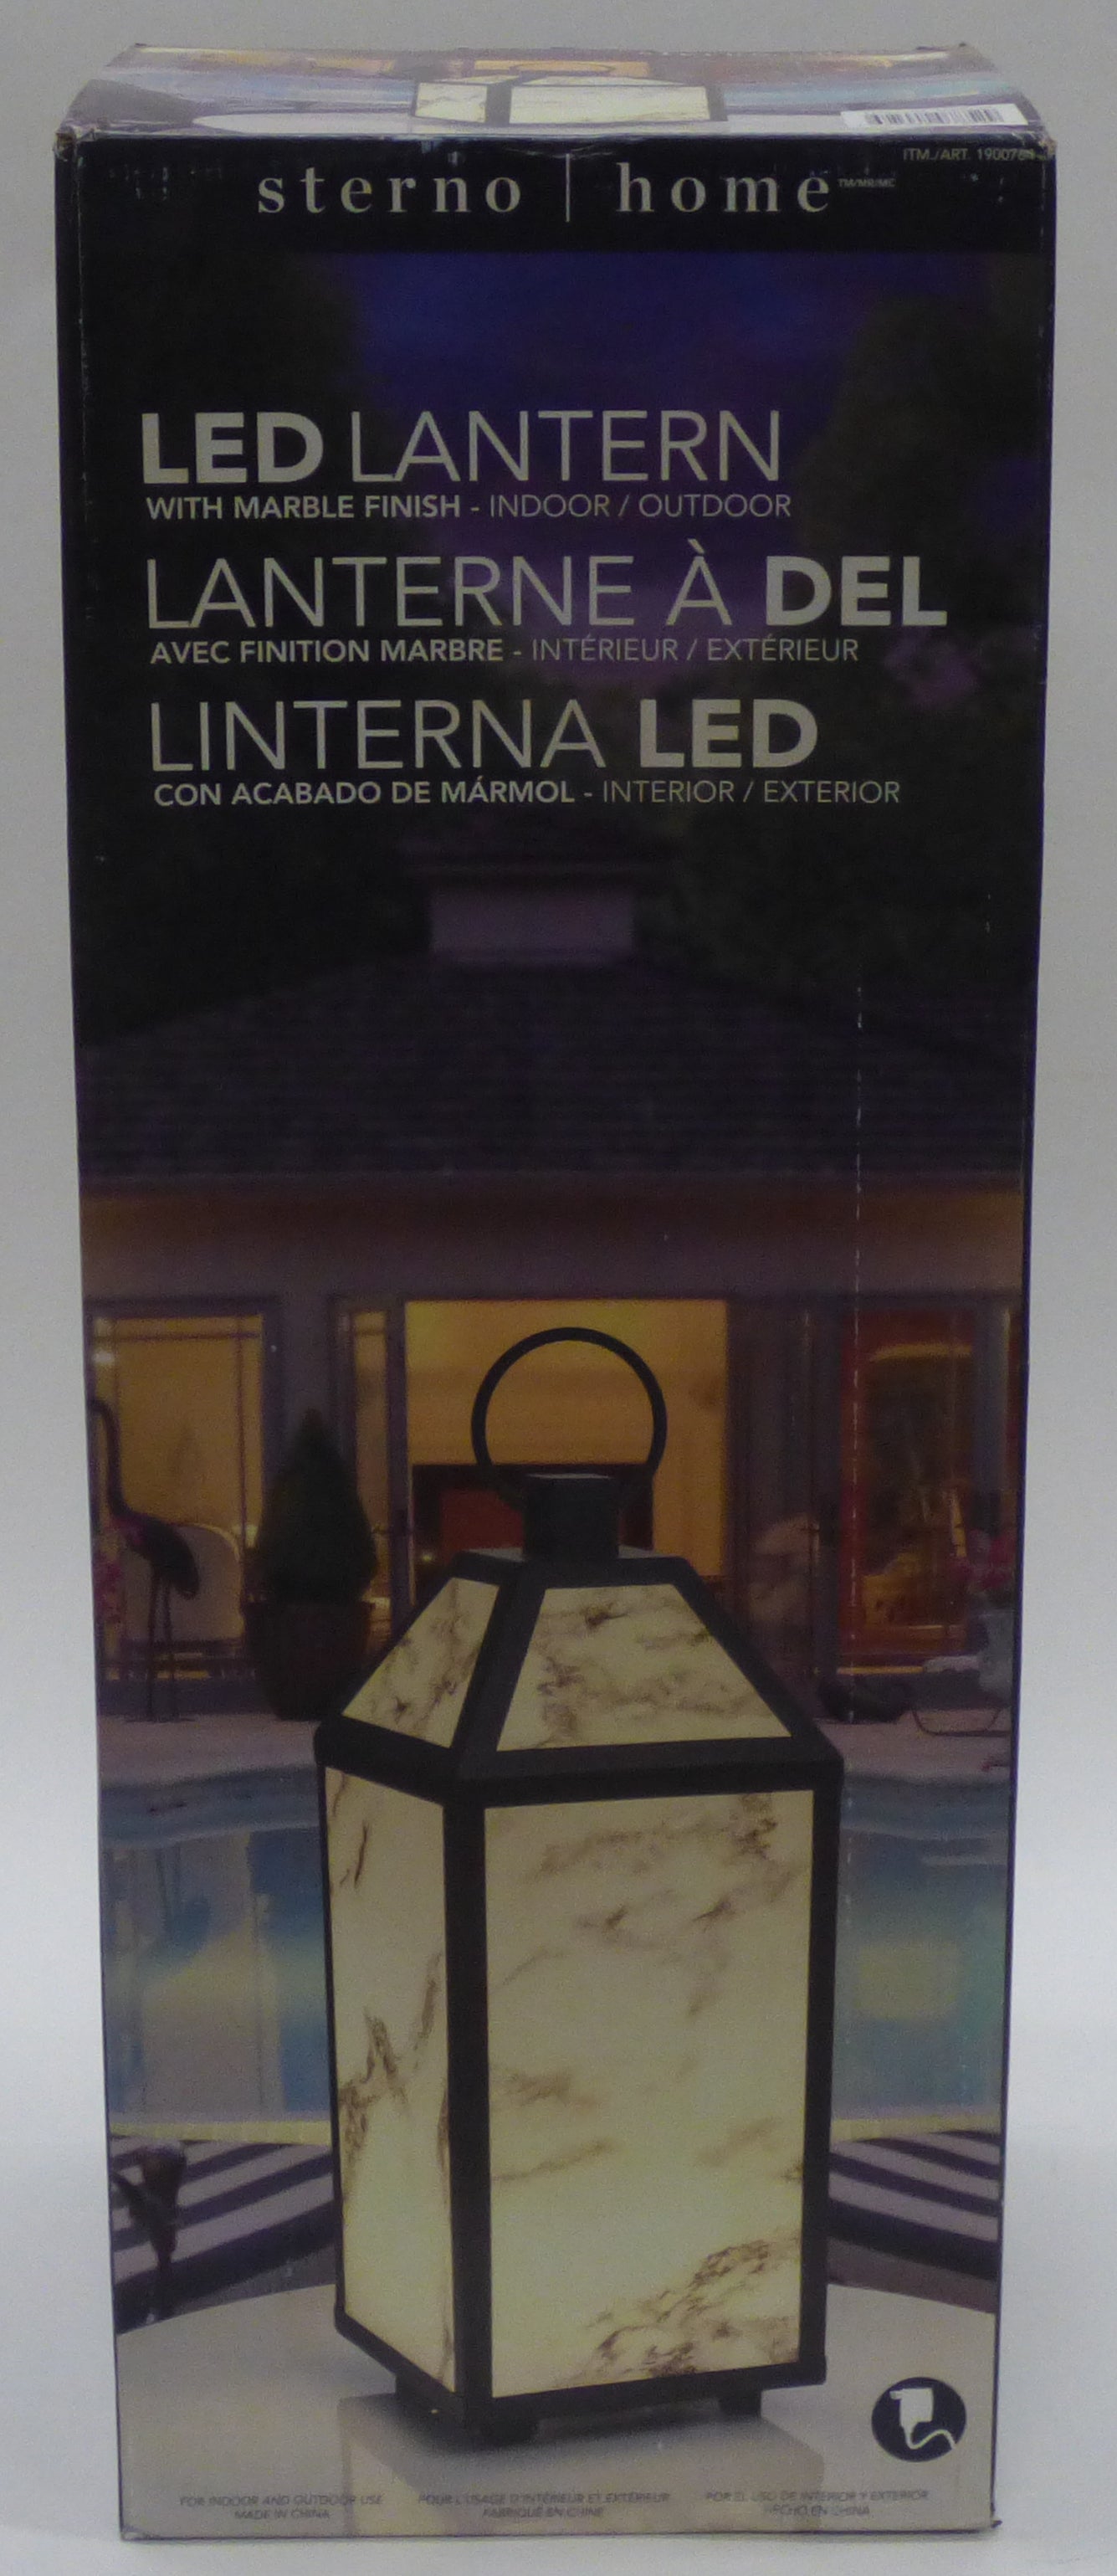 sterno home led lantern with marble finish retail box front